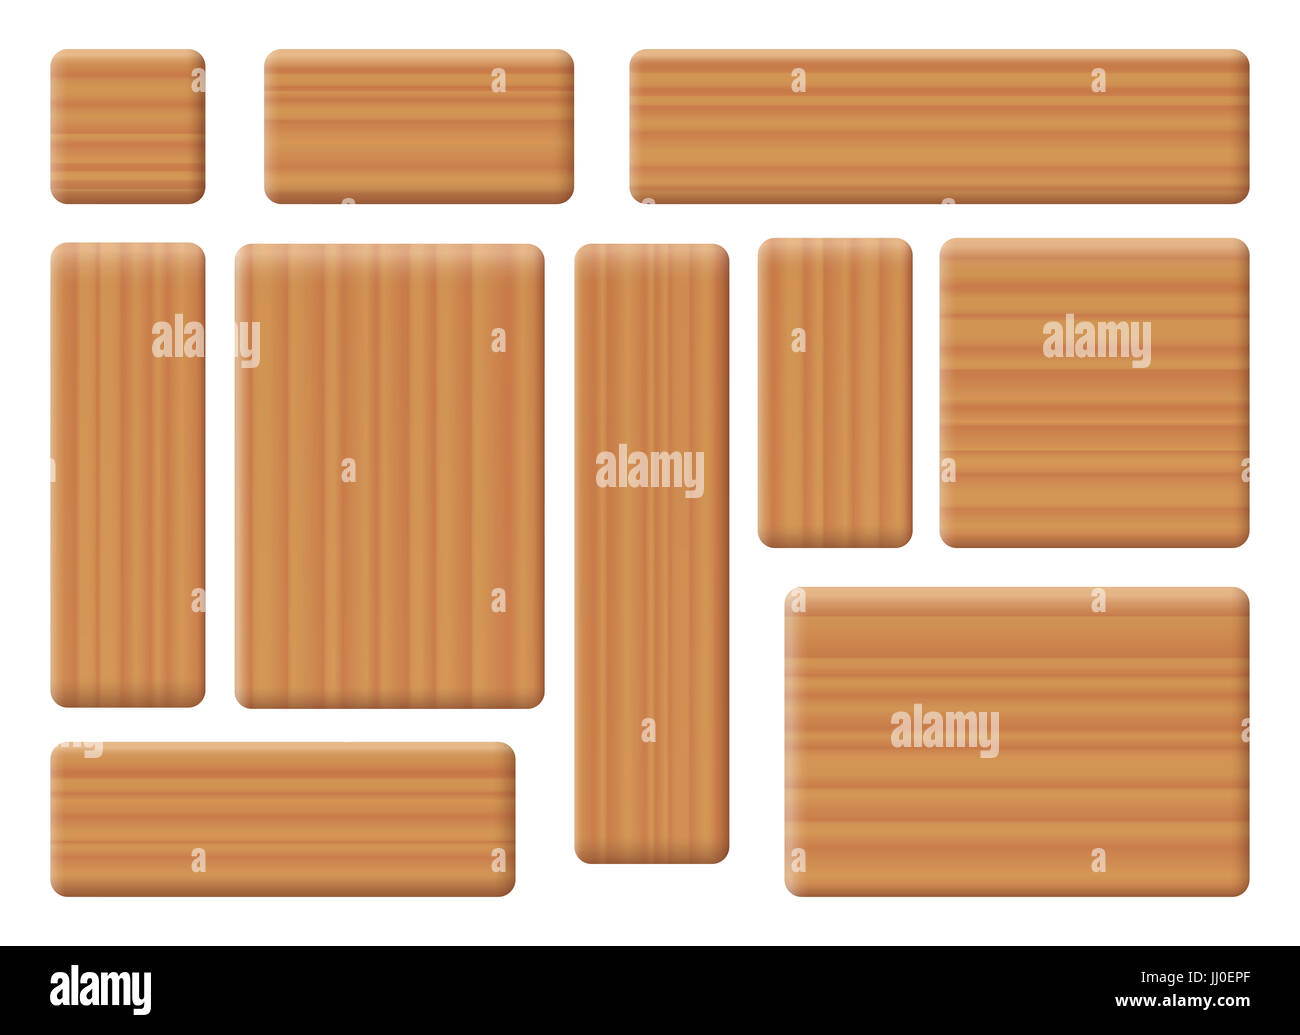 Wooden building bricks - toy blocks, various shapes, horizontal and vertical - ten items with wooden texture to be used as construction toys. Stock Photo